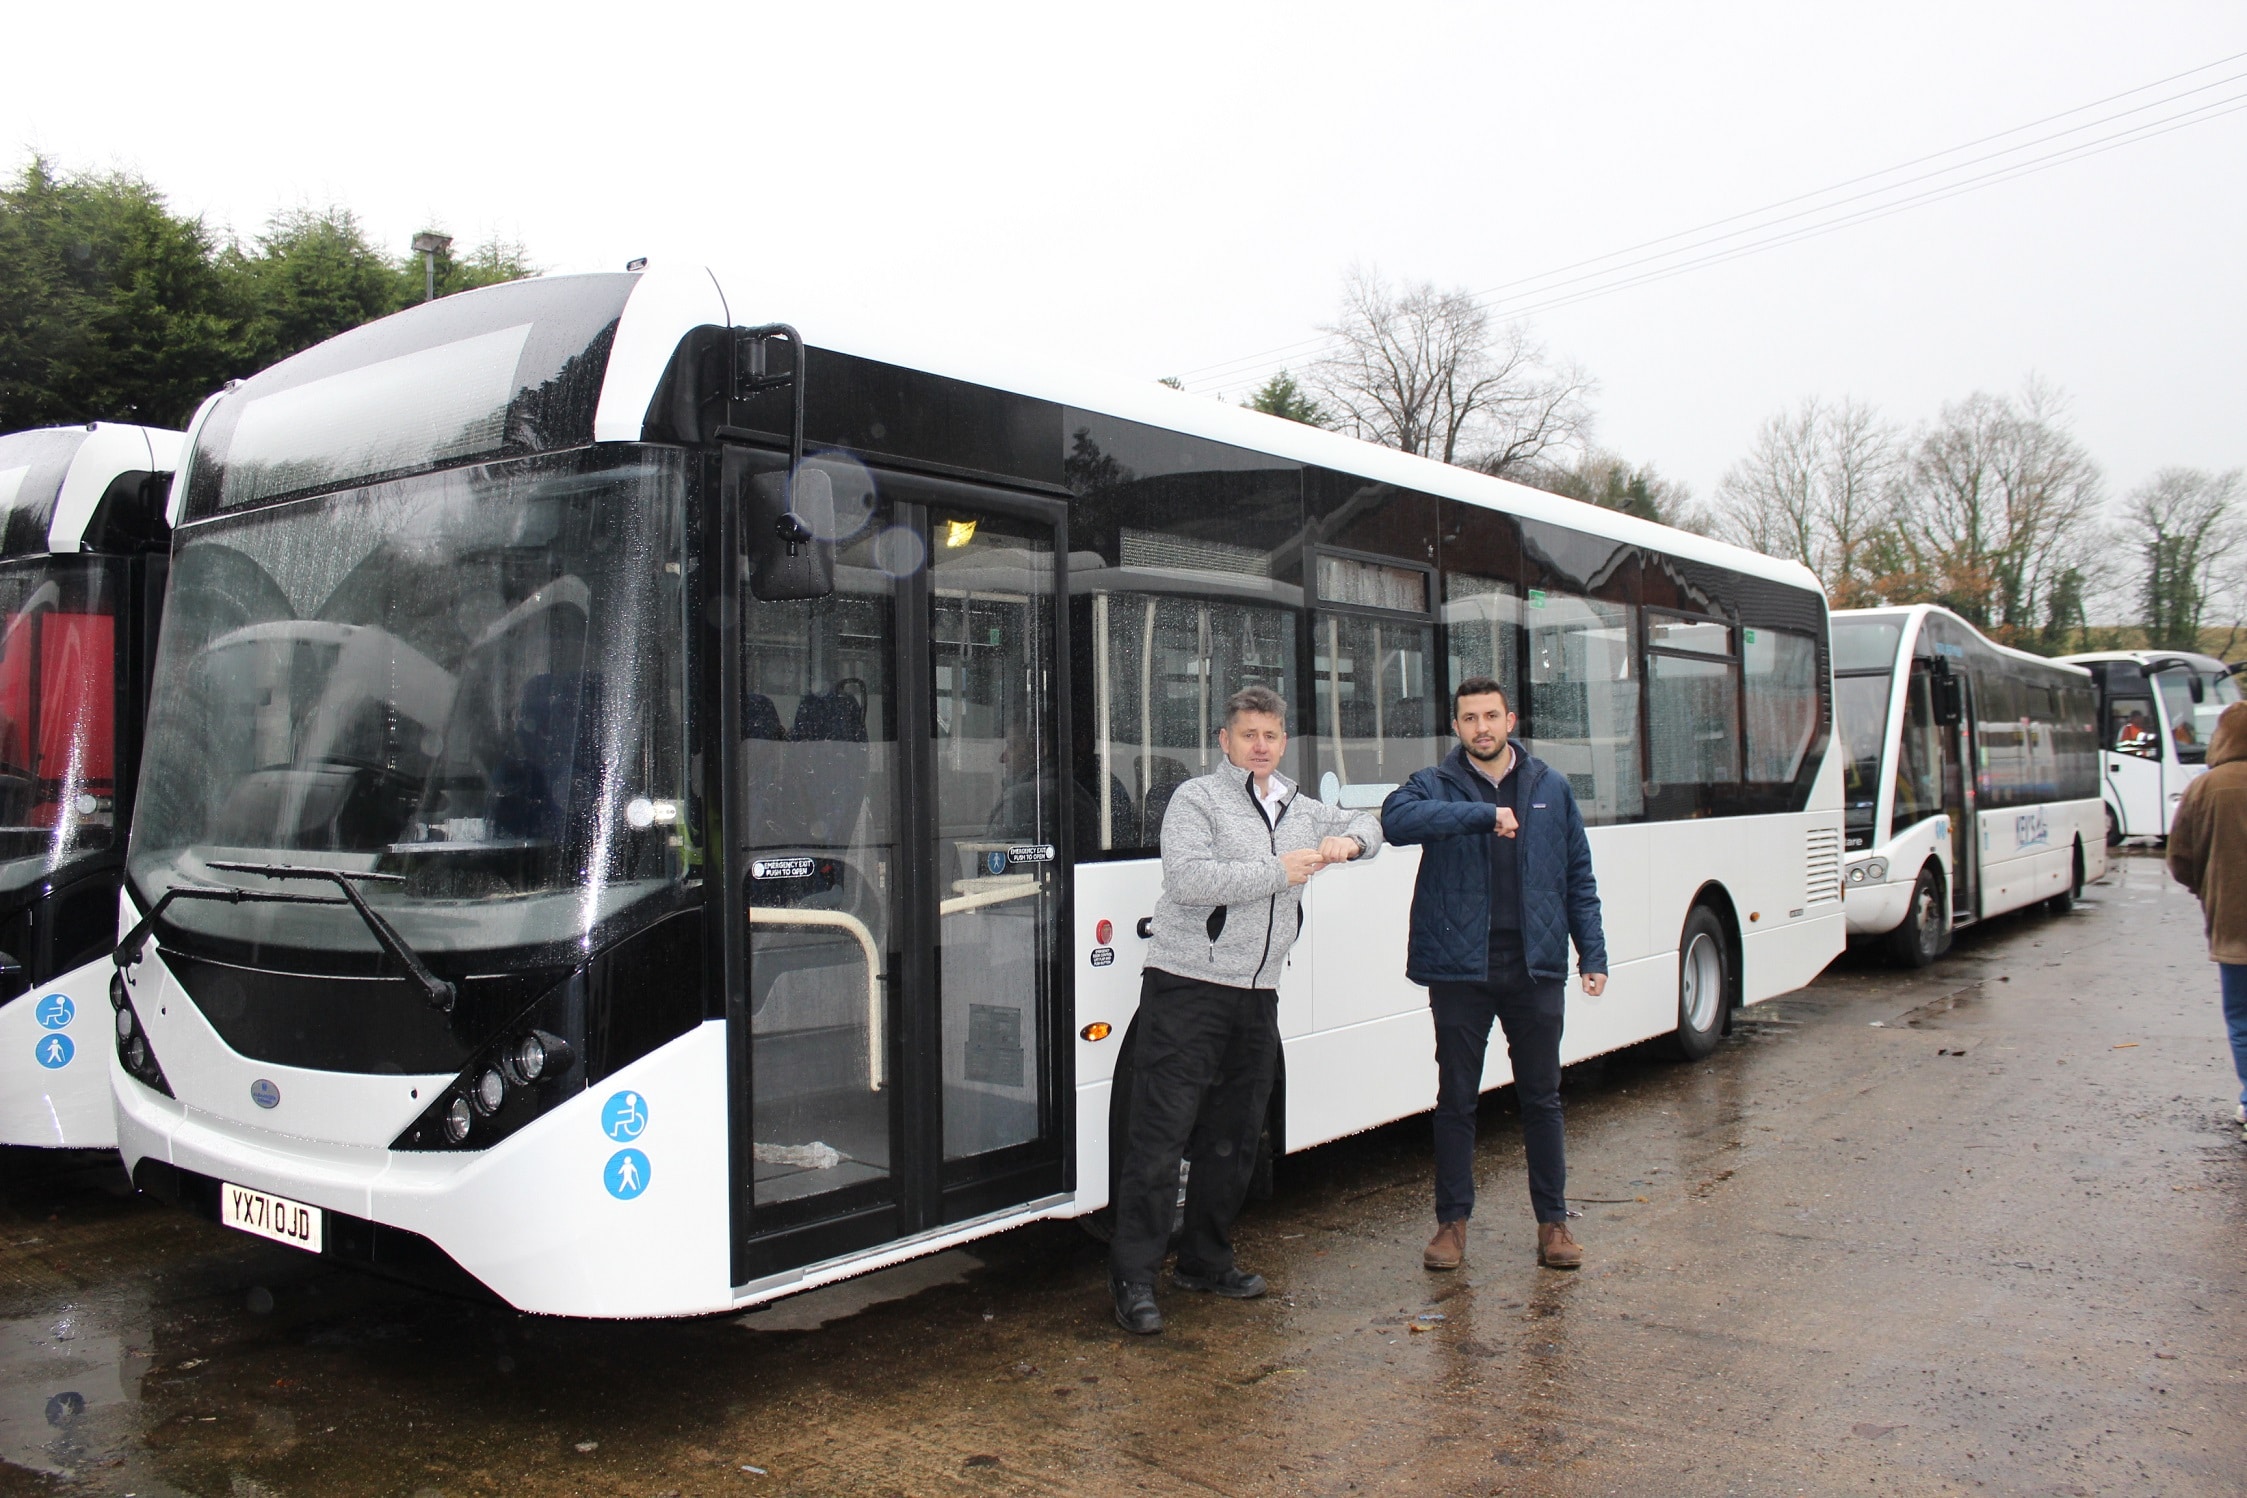 Kevs Cars and Coaches adds two Enviro200 models from Mistral